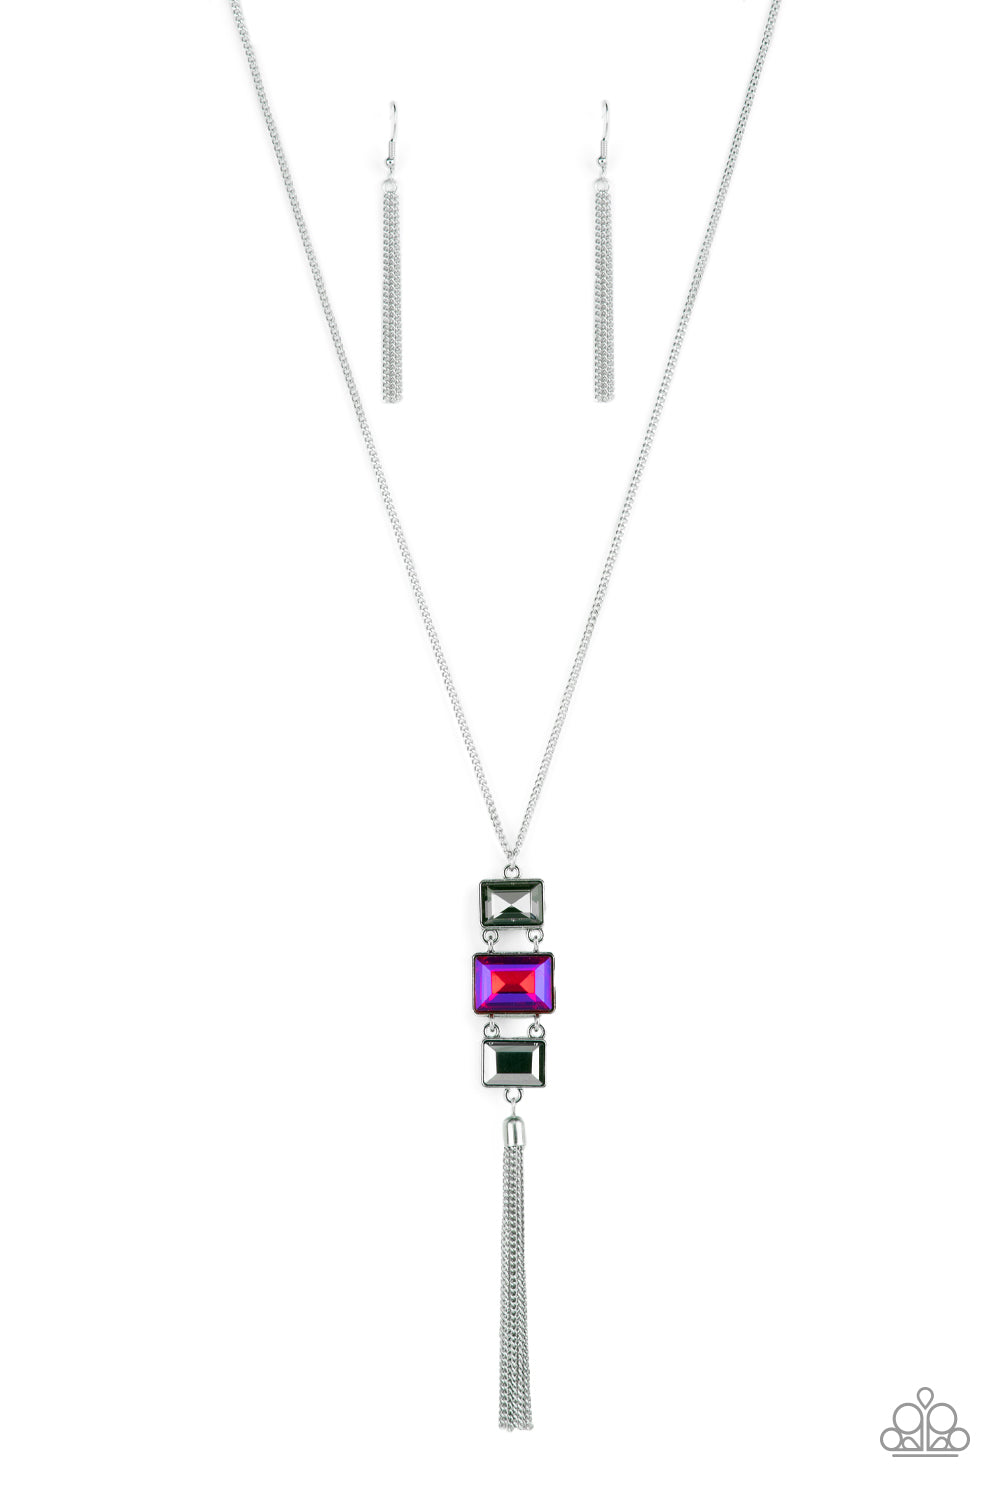 Paparazzi Necklaces - Uptown Totem - Pink